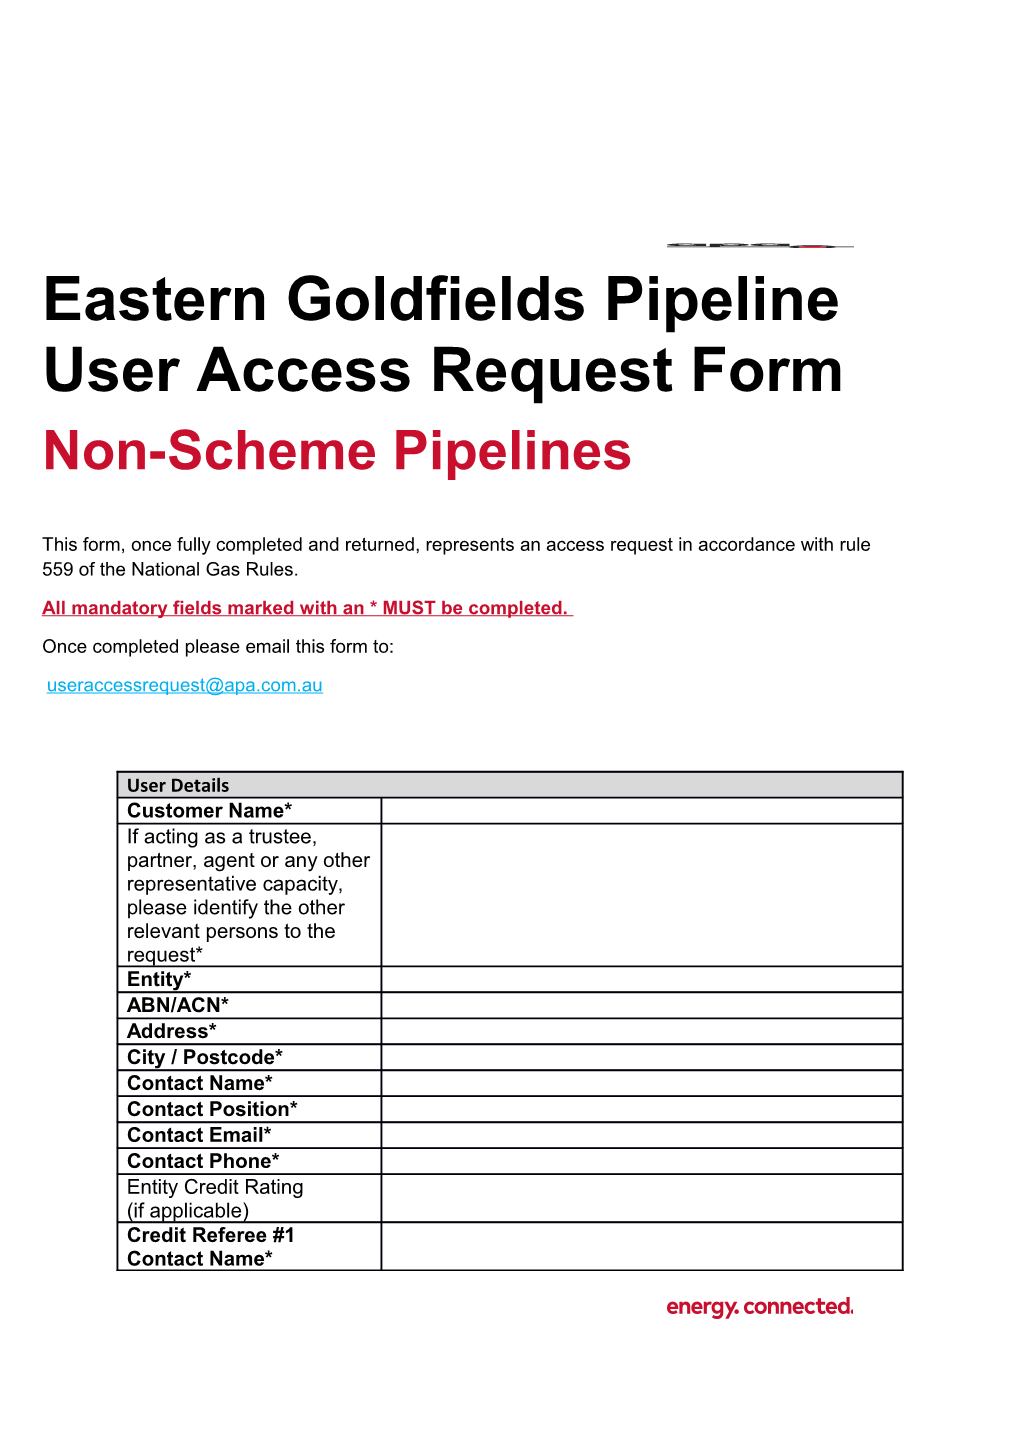 Eastern Goldfields Pipeline User Access Request Form